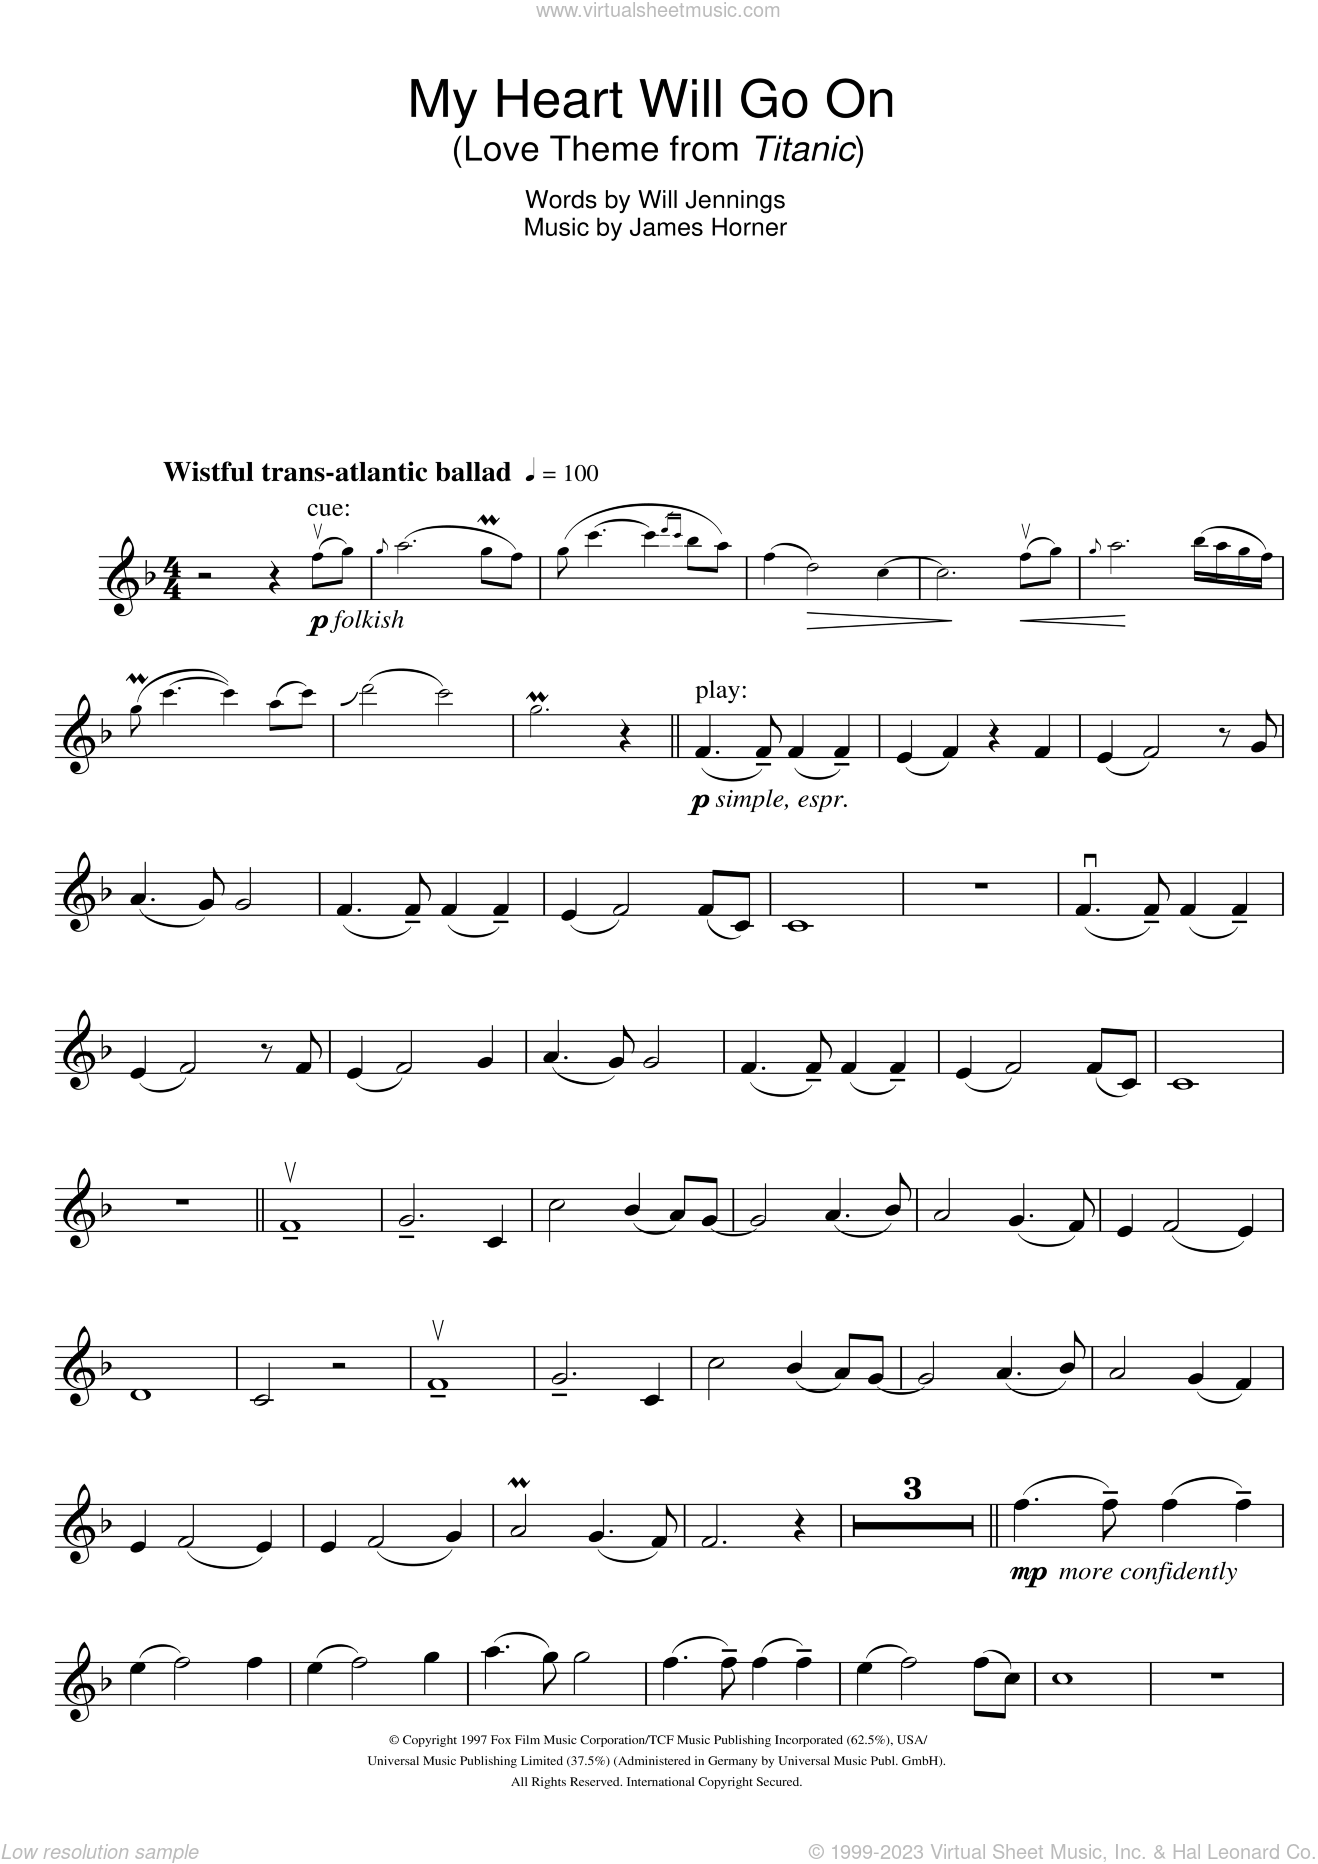 My Heart Will Go On (Love Theme from Titanic) sheet music for violin solo v2